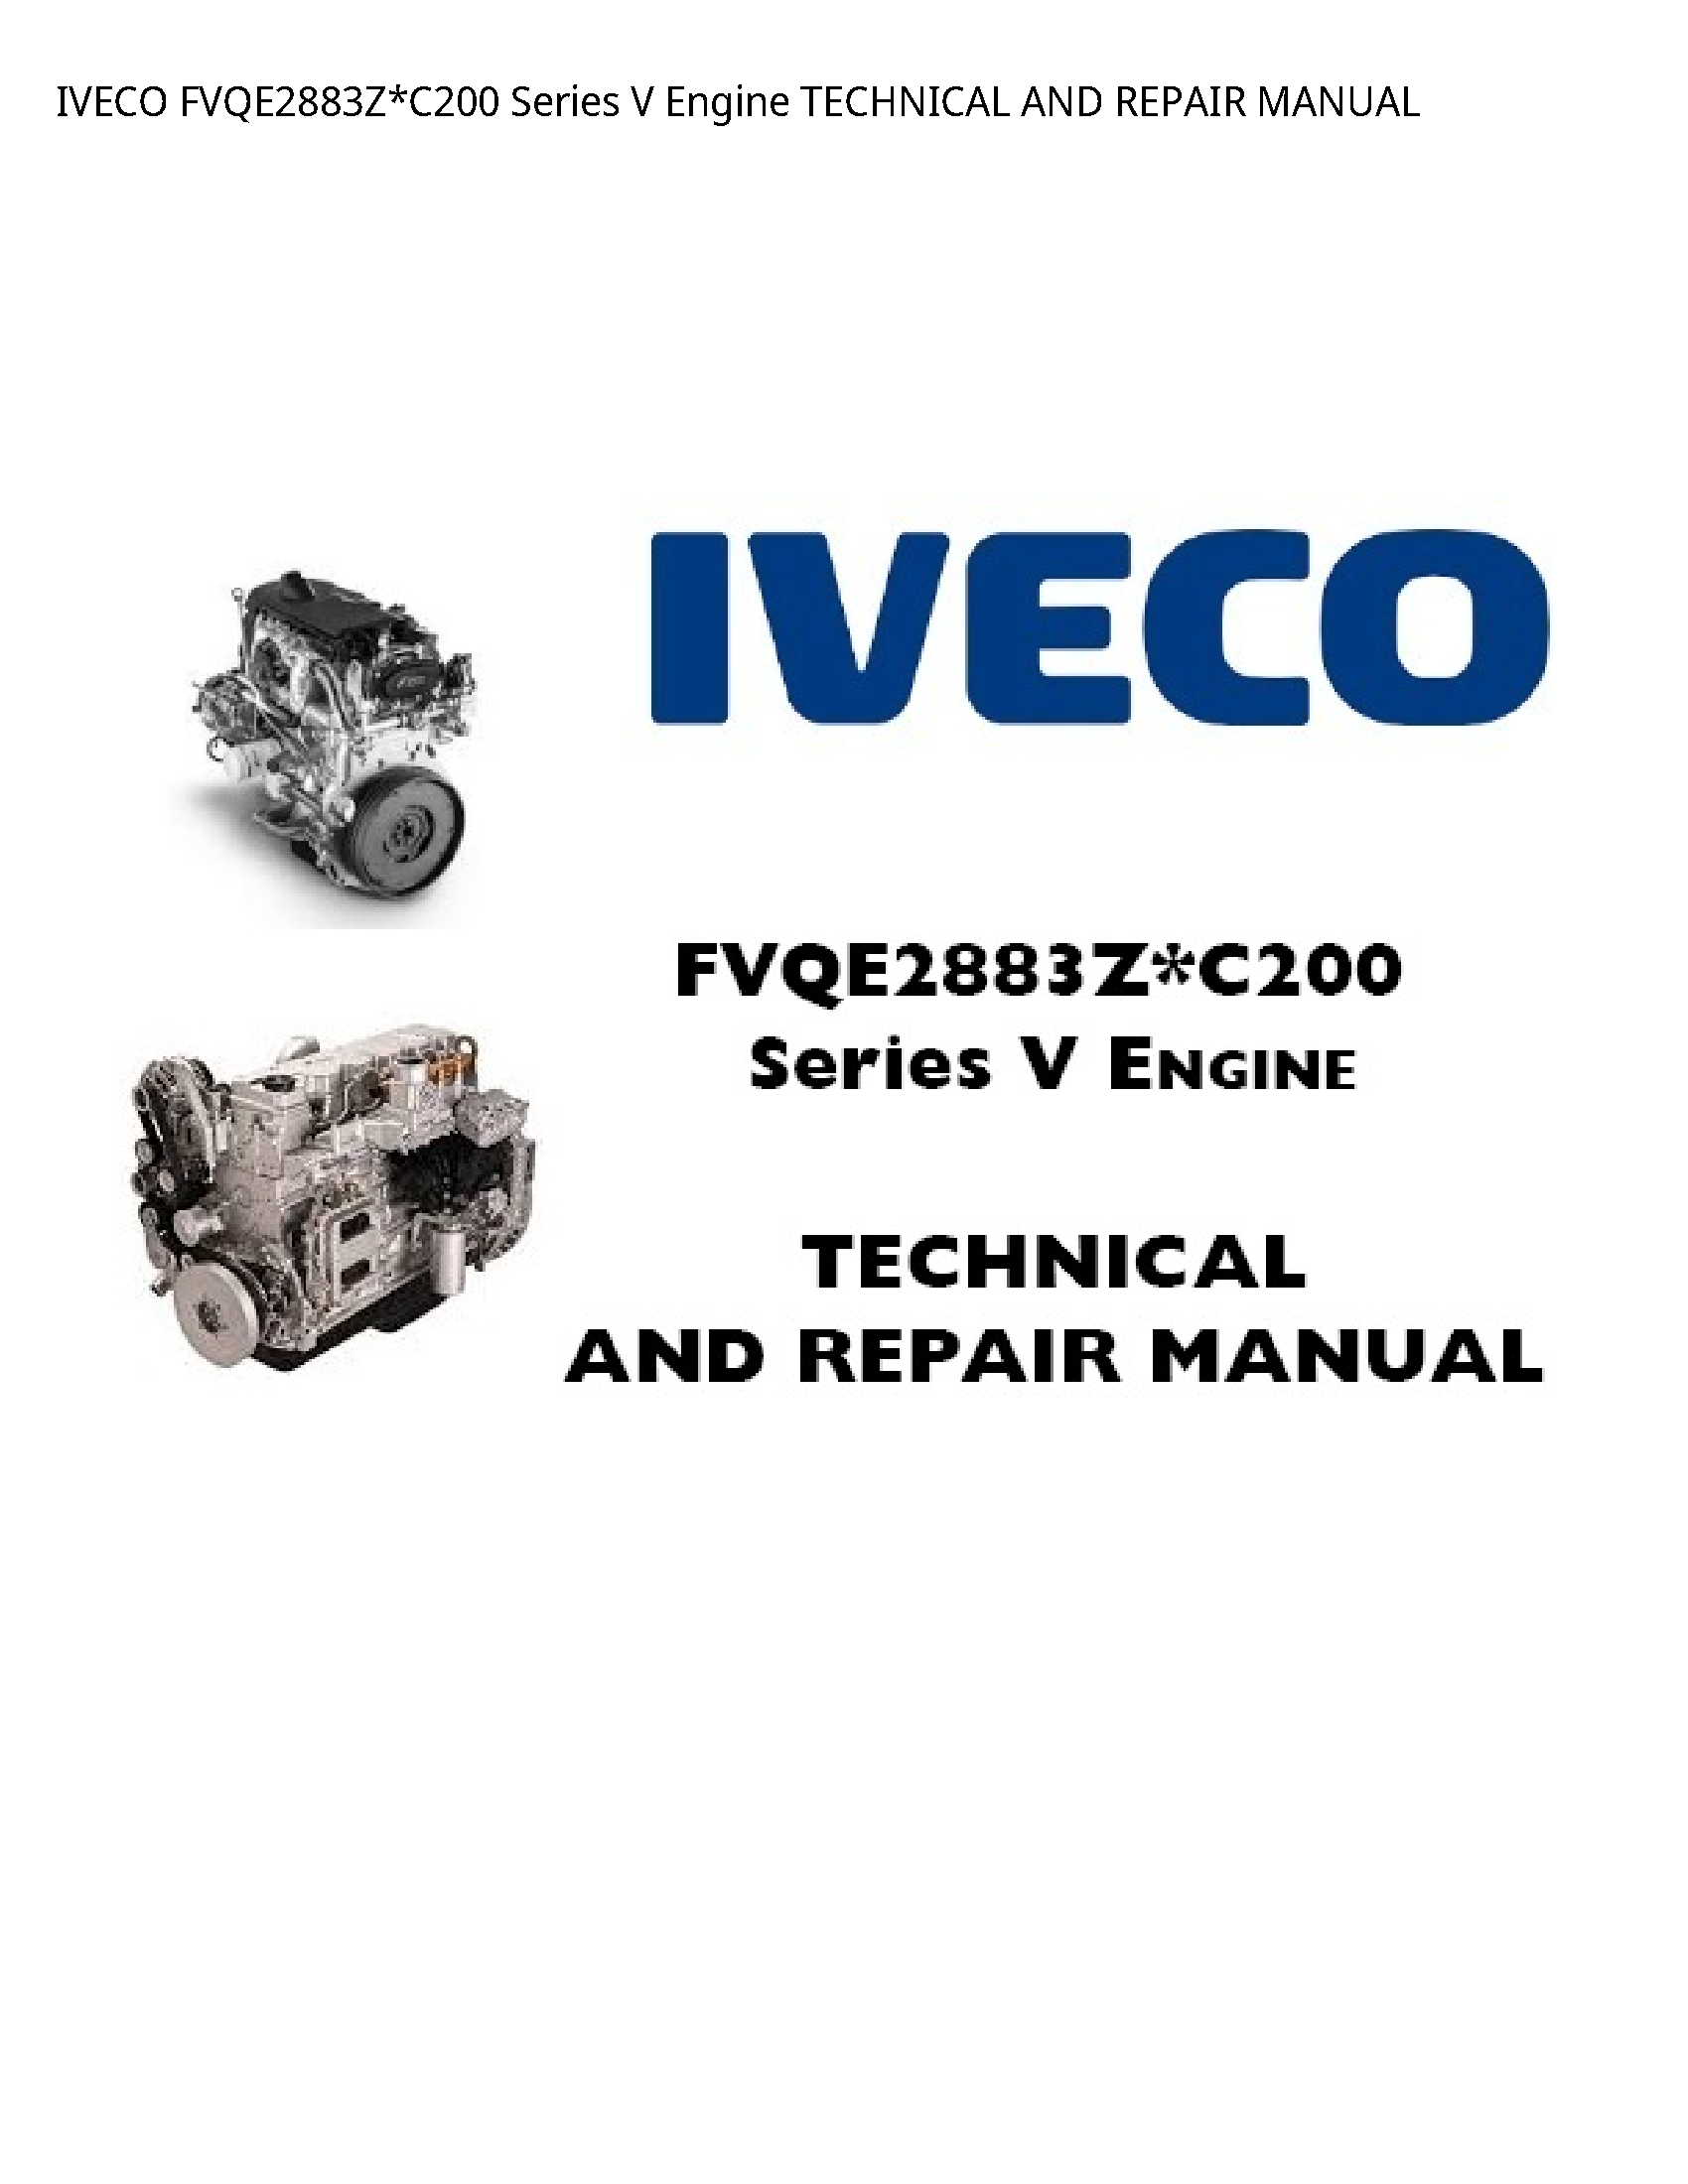 Iveco FVQE2883Z*C200 Series Engine TECHNICAL AND REPAIR manual